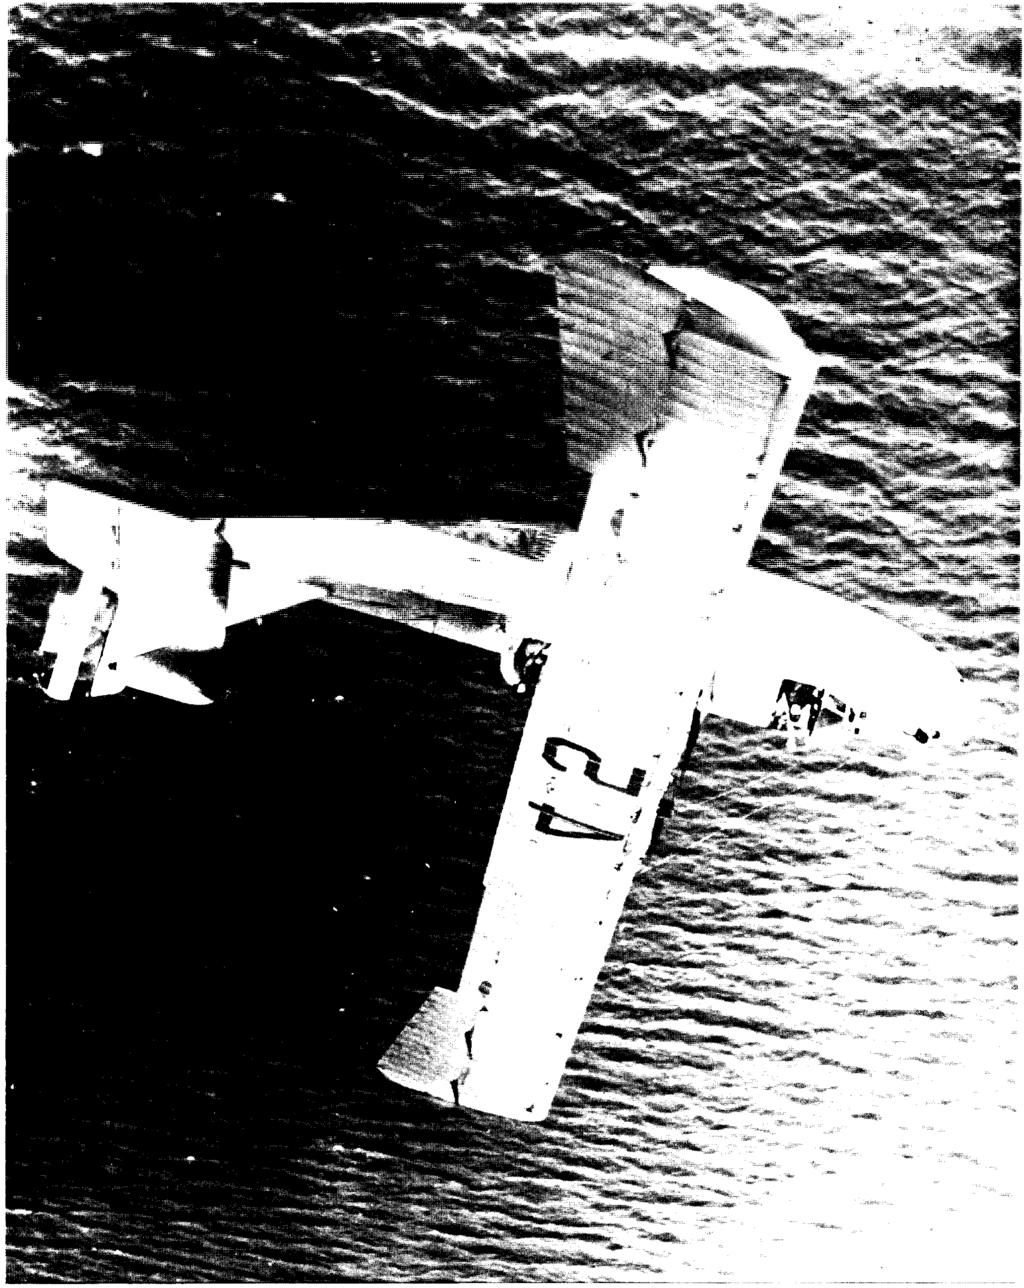 H-16, SHOWN WITH POSTWAR MARKINGS, WAS THE